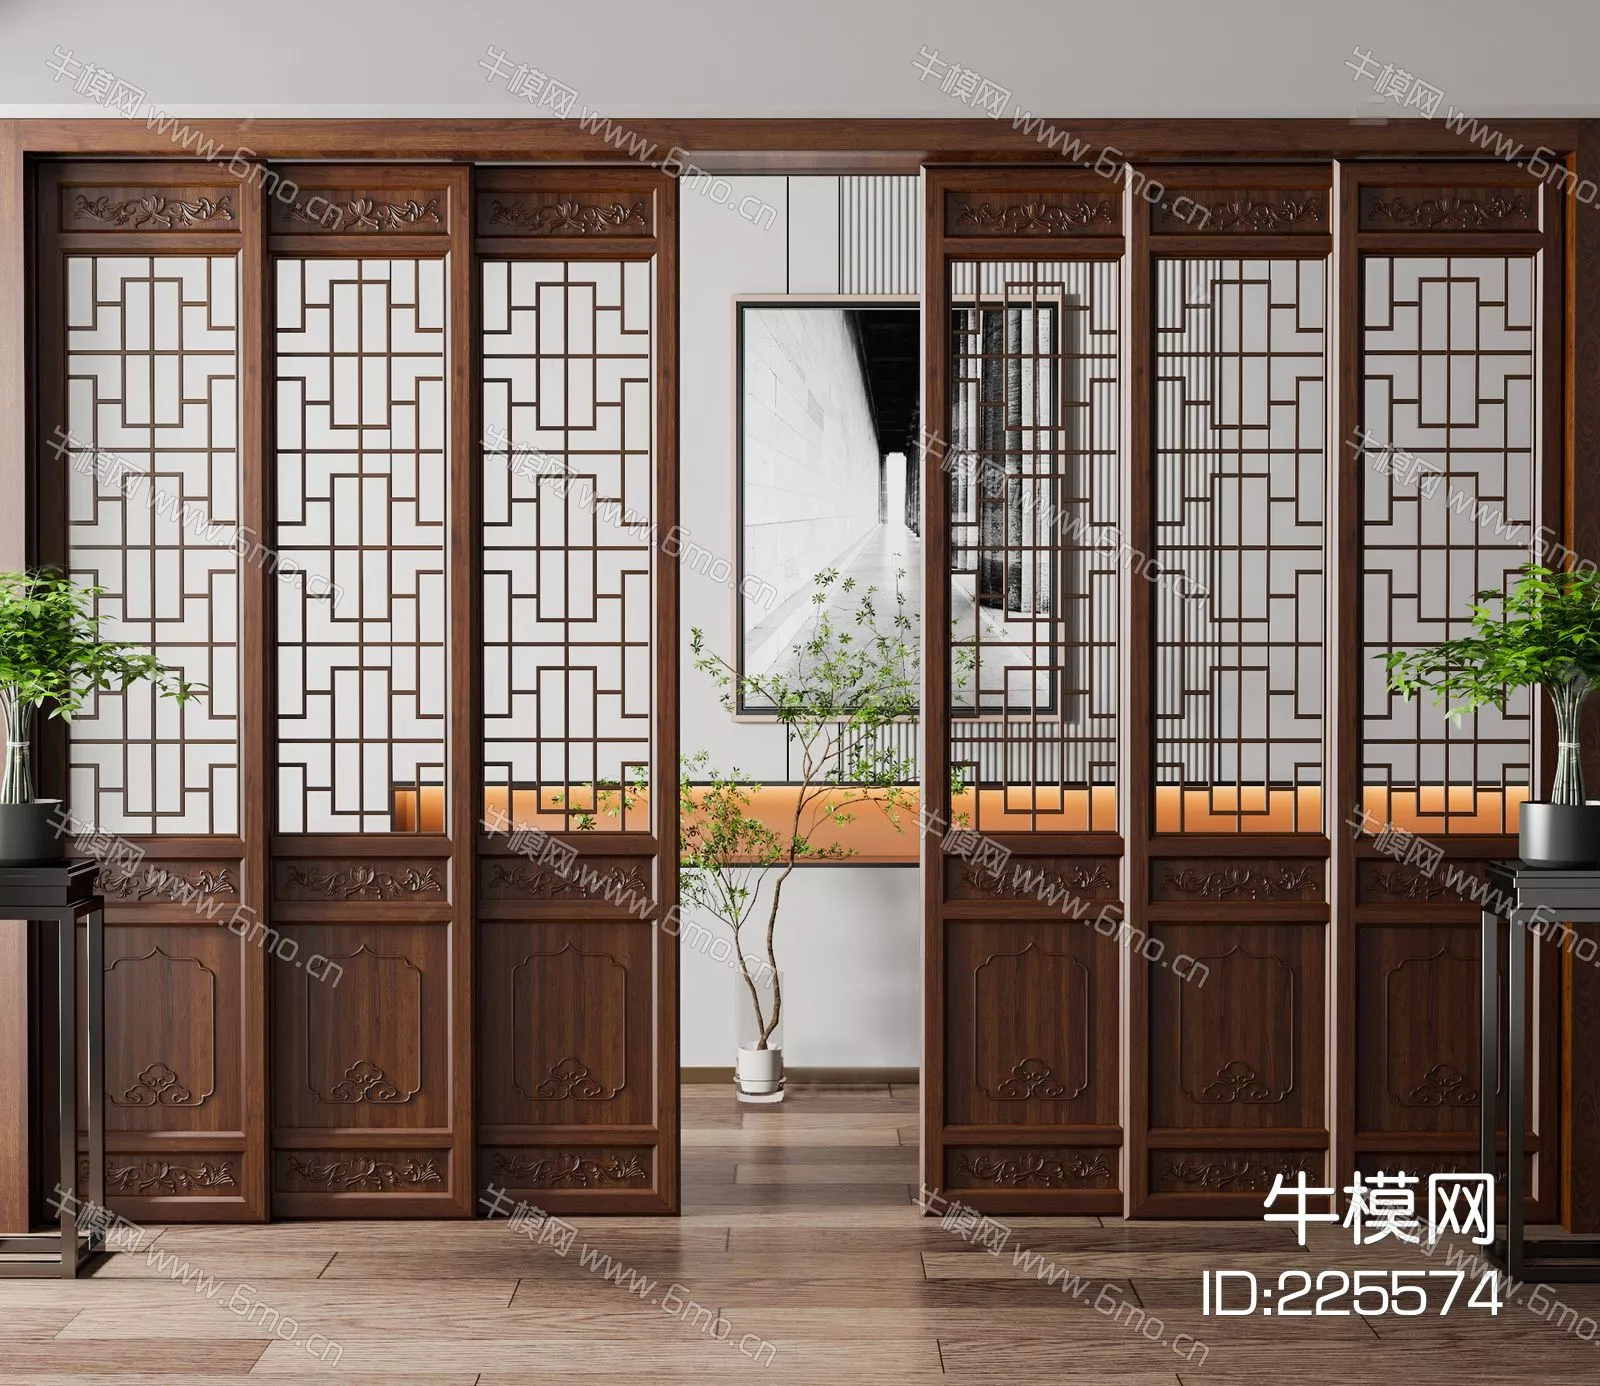 CHINESE DOOR AND WINDOWS - SKETCHUP 3D MODEL - ENSCAPE - 225574